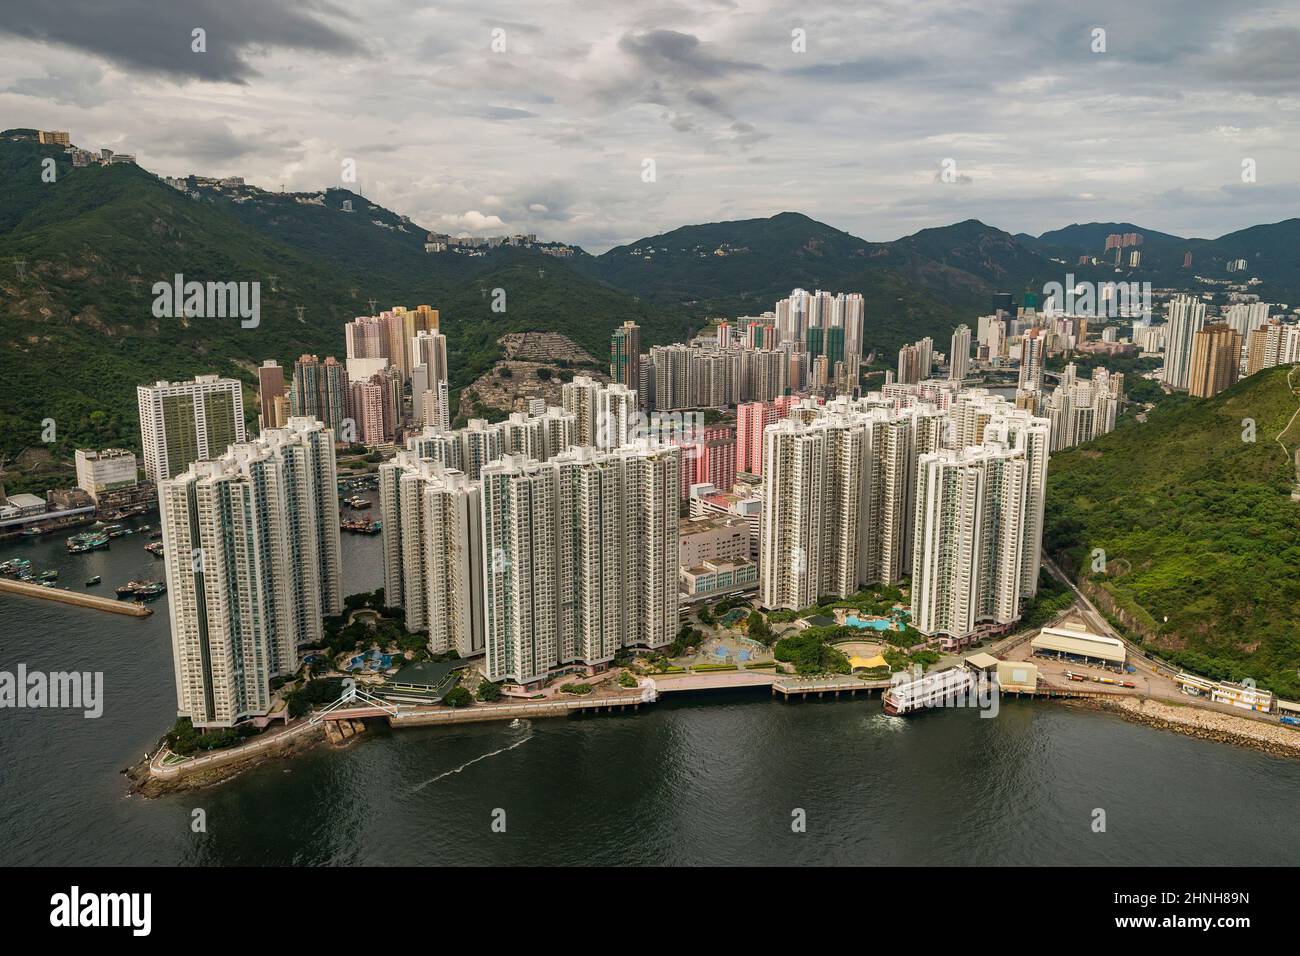 Aerial from helicopter showing the high-rise housing estates of Aberdeen and Ap Lei Chau, Hong Kong Island, 2008 Stock Photo